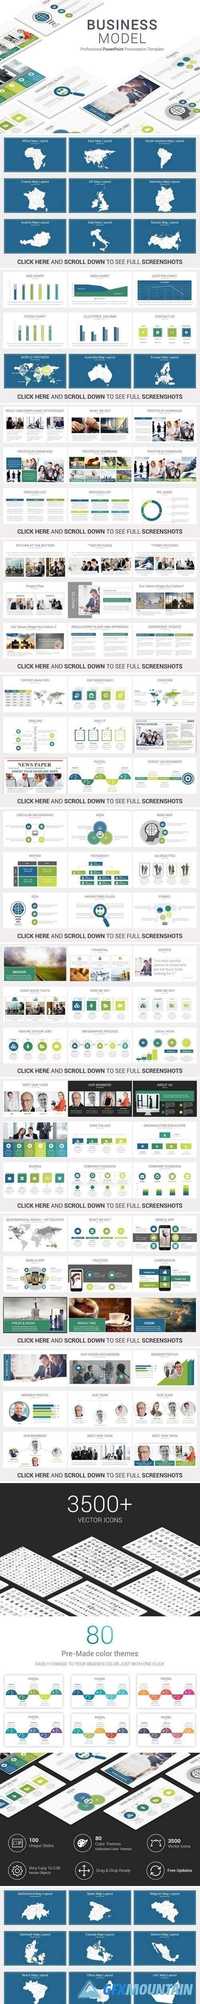 Business Model PowerPoint Template 2072277